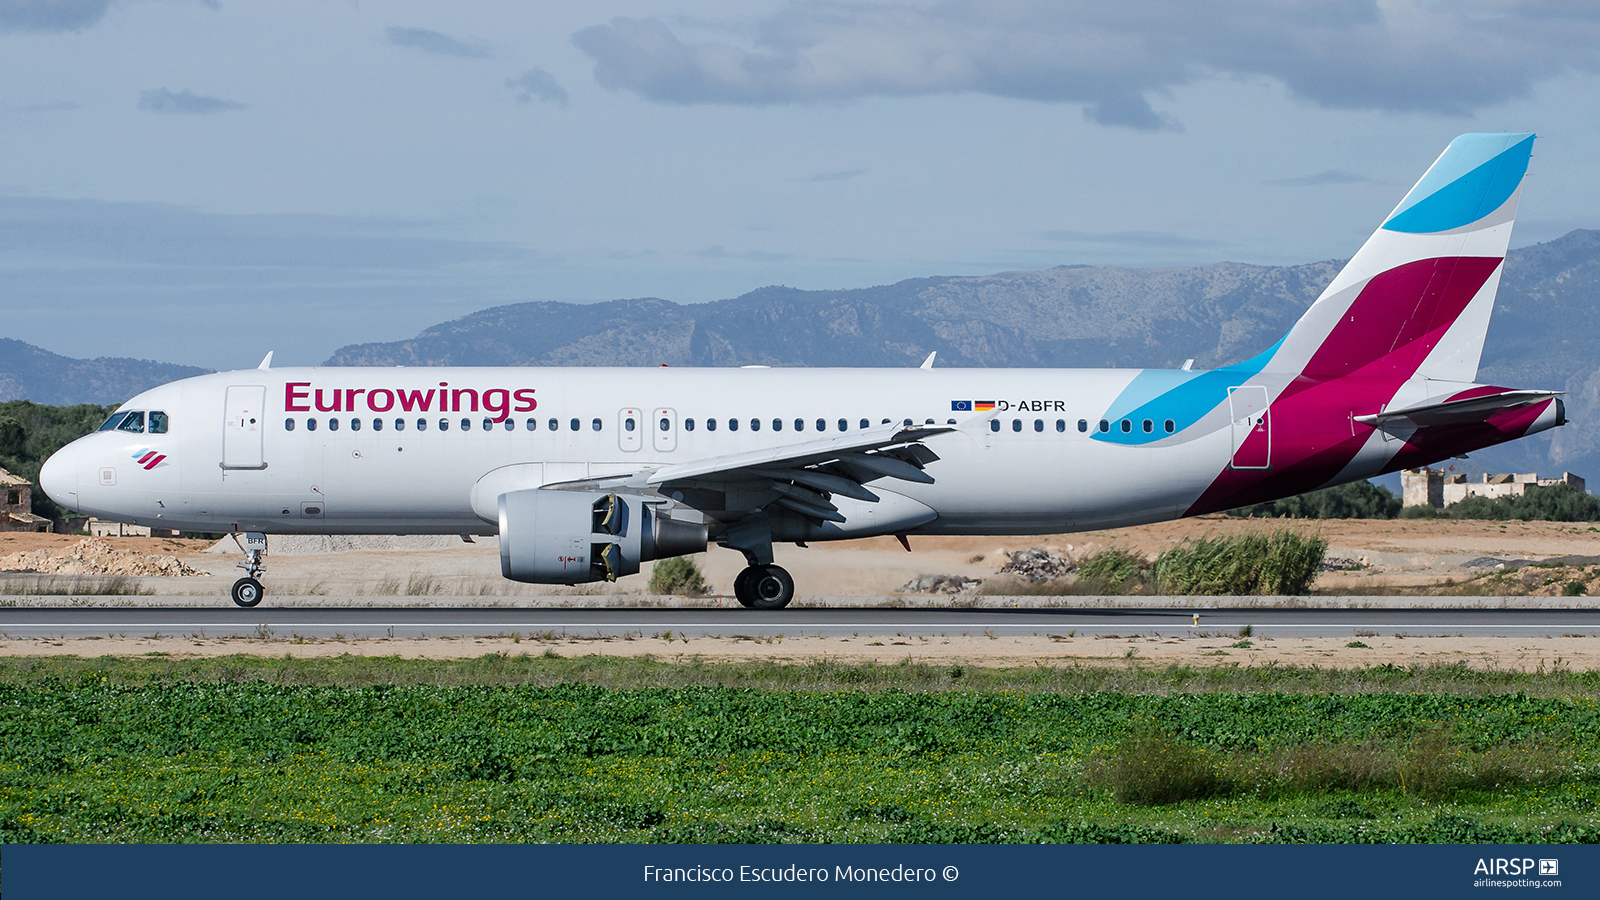 Eurowings  Airbus A320  D-ABFR